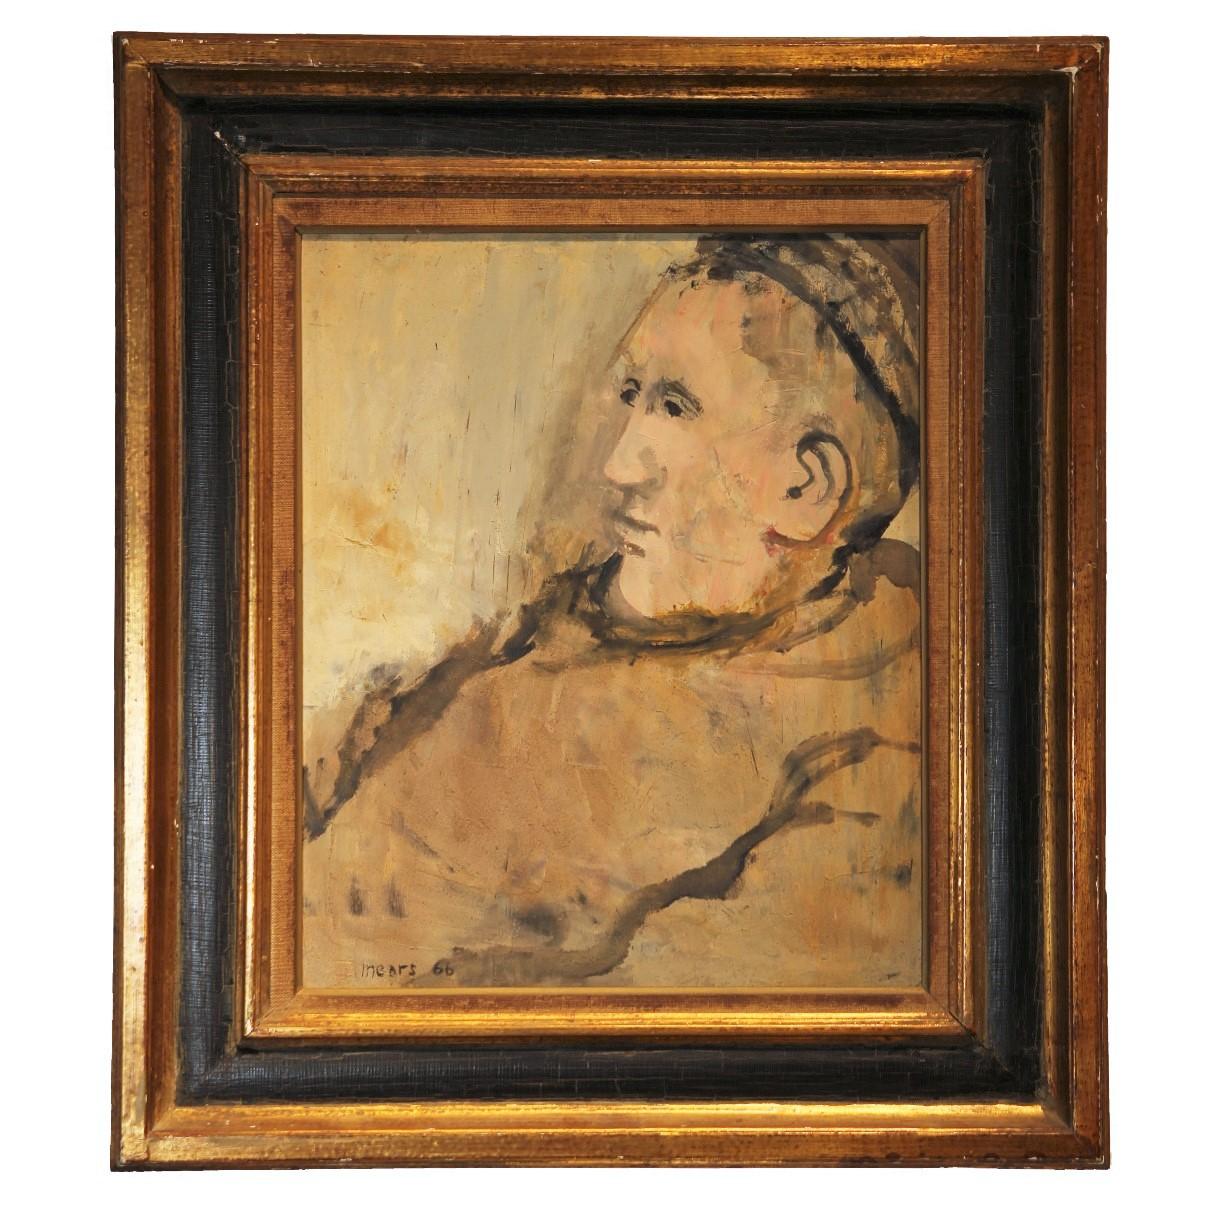 Impressionist style portrait of a man who is said to be a fisherman. The work is painted in neutral tones. It is framed in a gold frame with a black trim. The work is signed by the artist in the bottom corner.
Dimensions Without Frame: H 18 in. x W